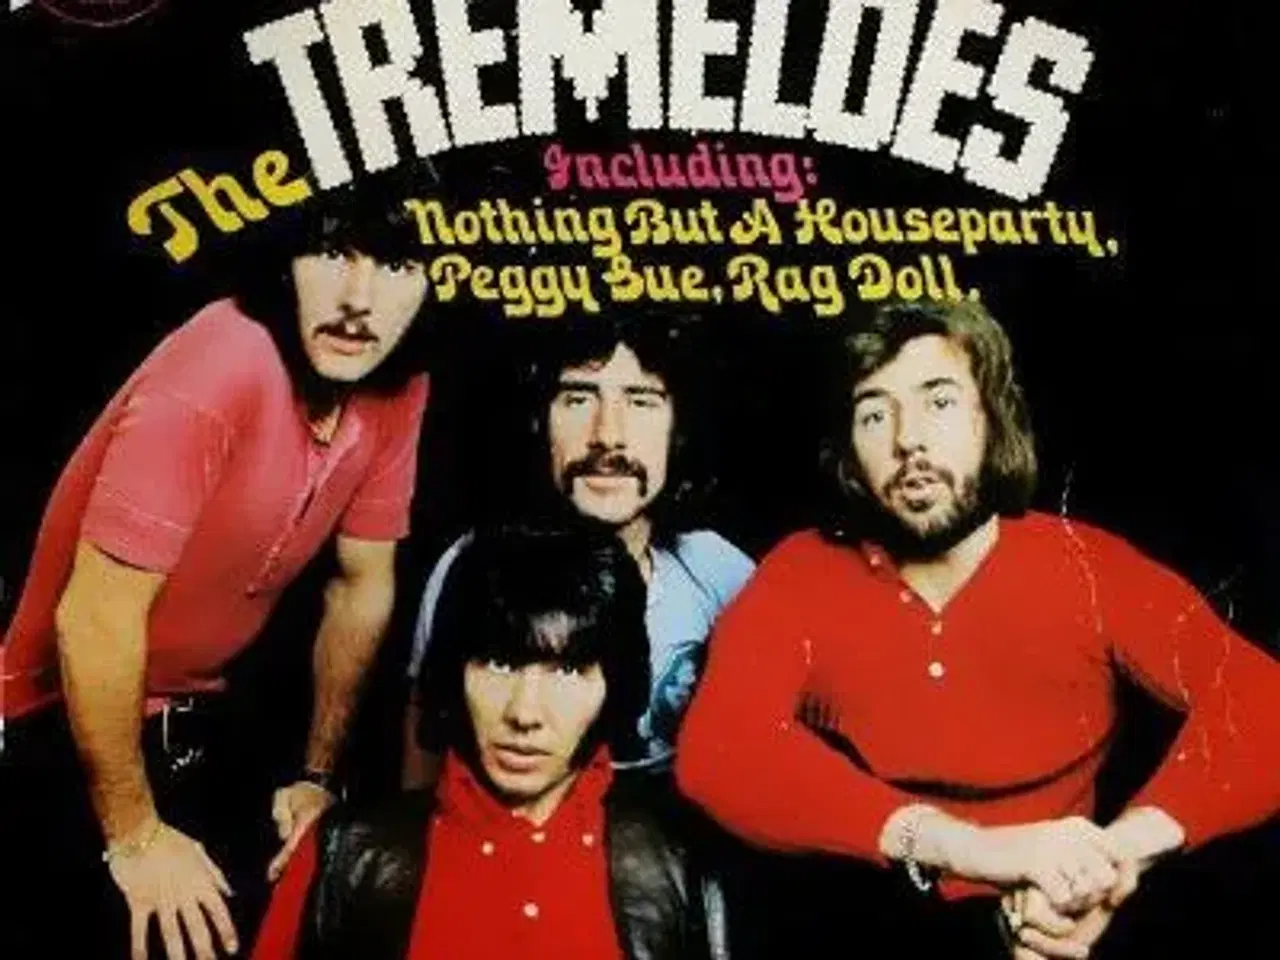 Billede 1 - Tremeloes - Reach Out For The Tremeloes